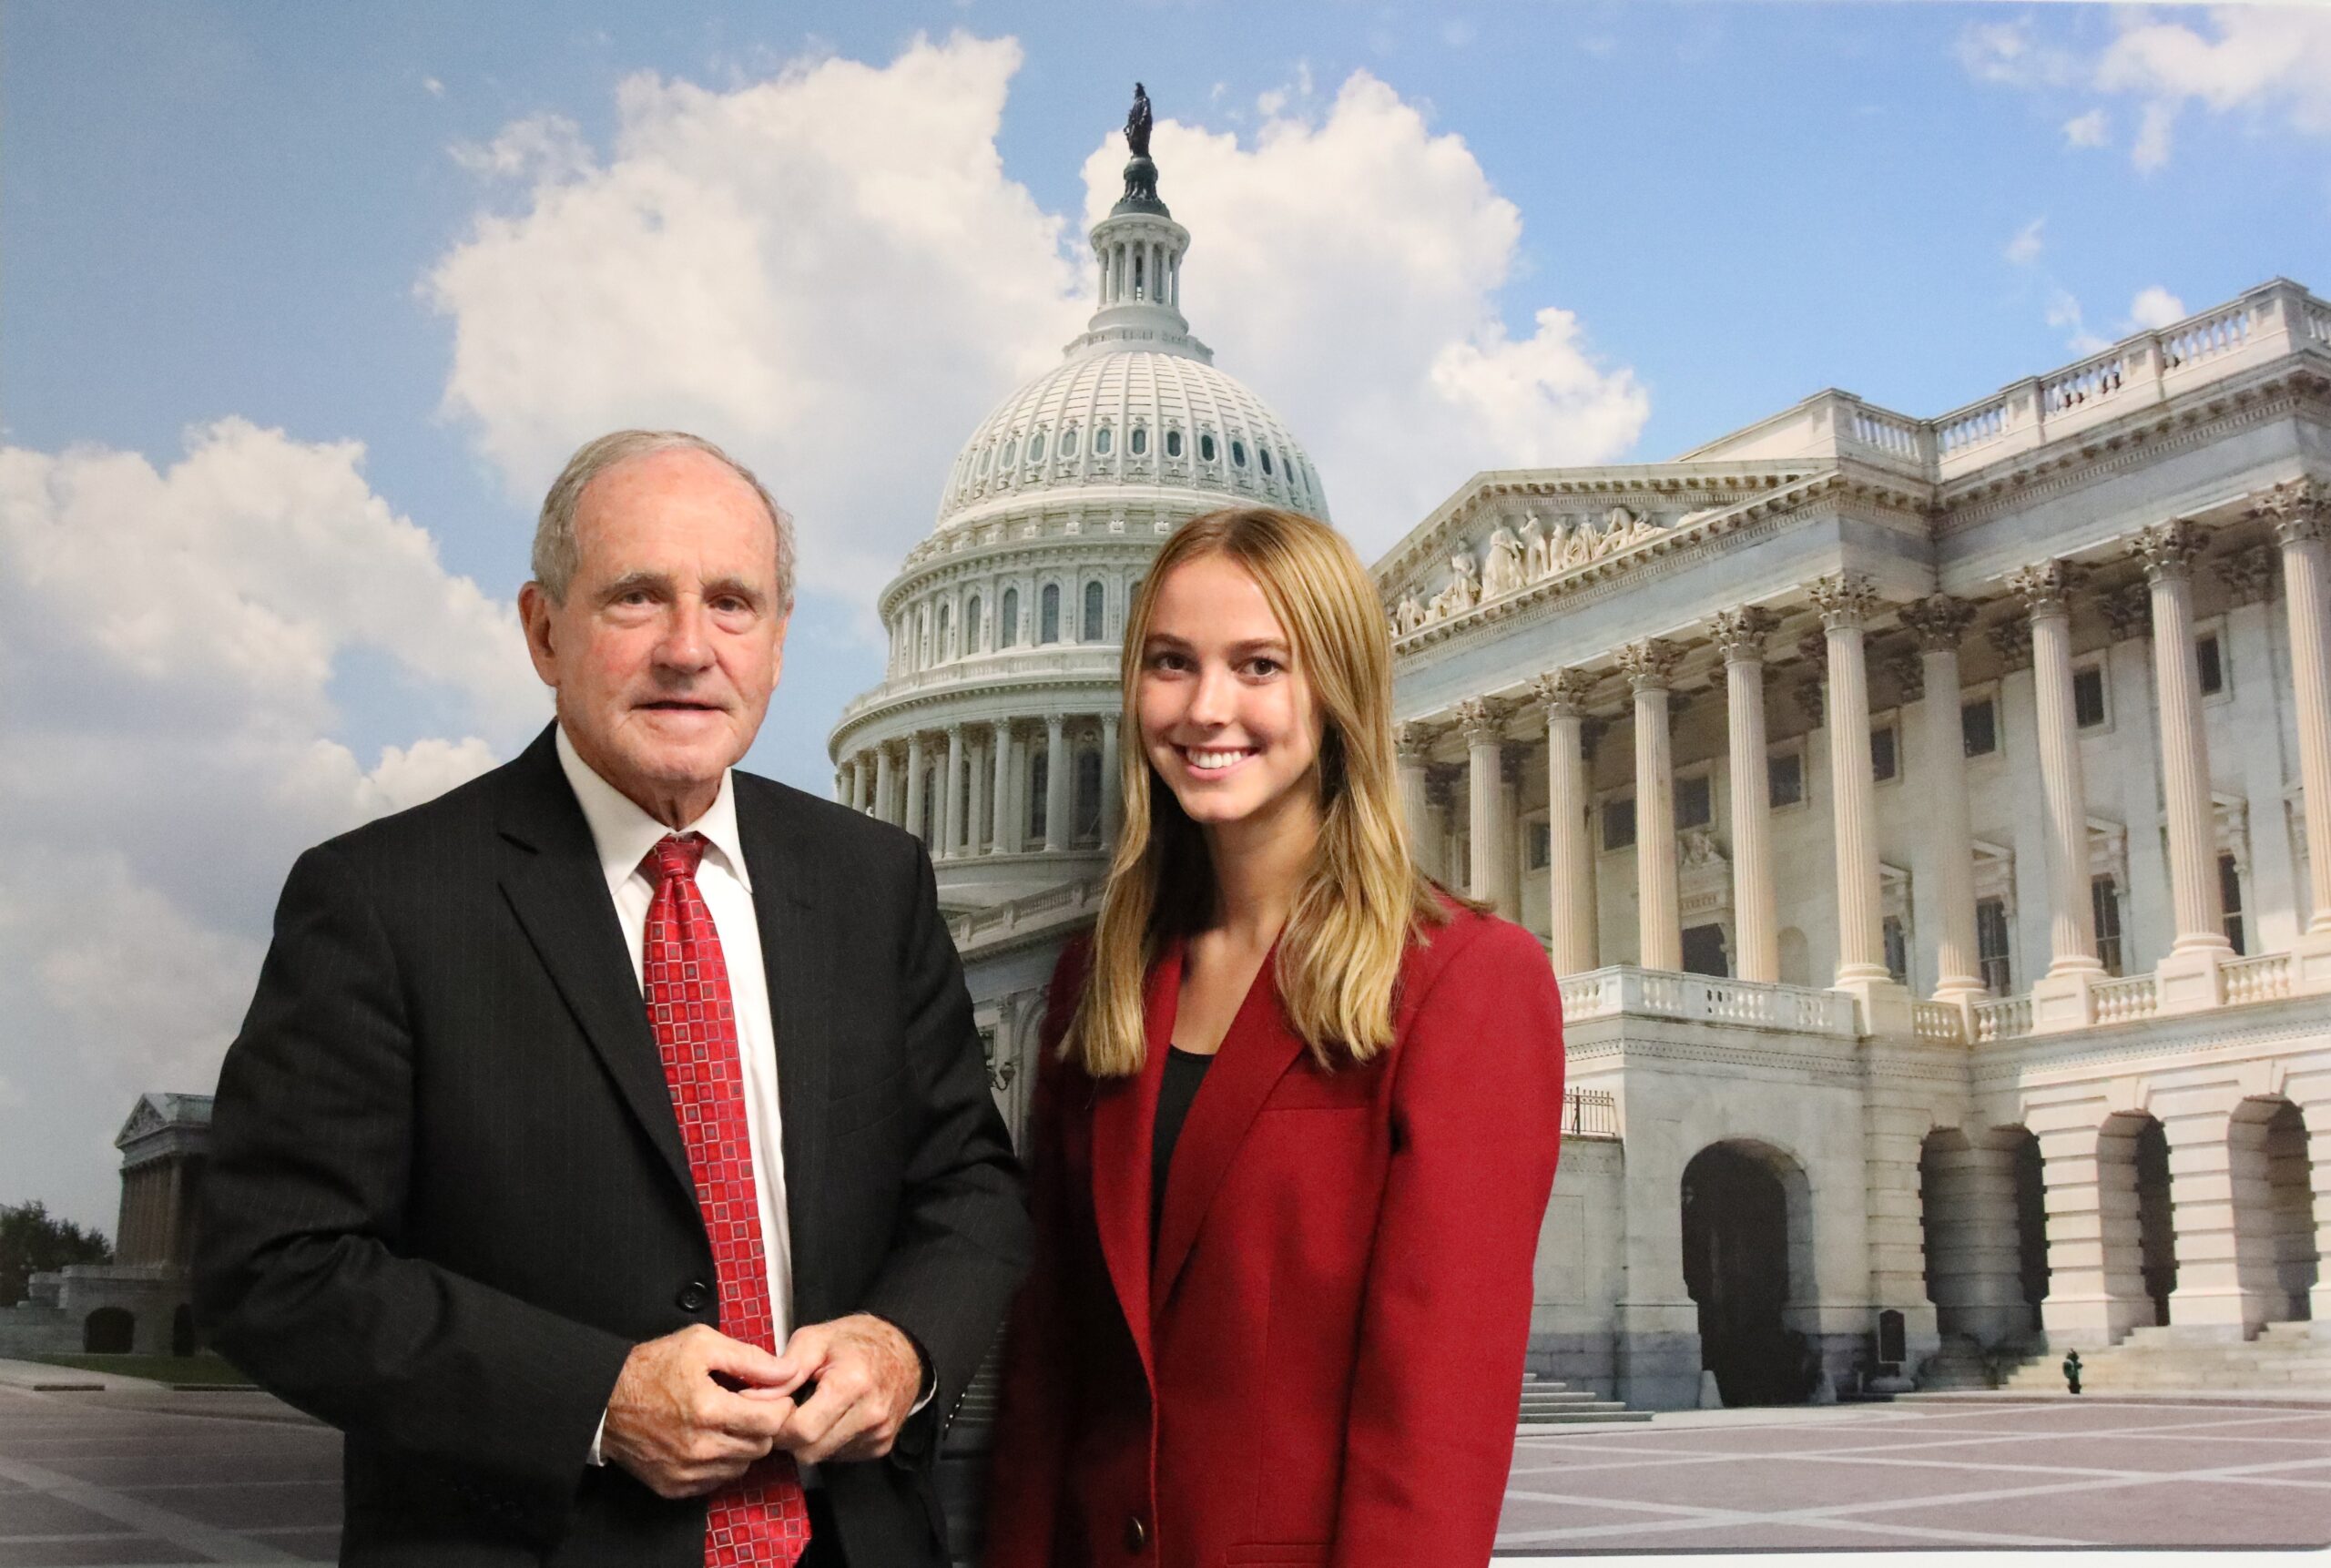 Jim Risch and Sarah Cole